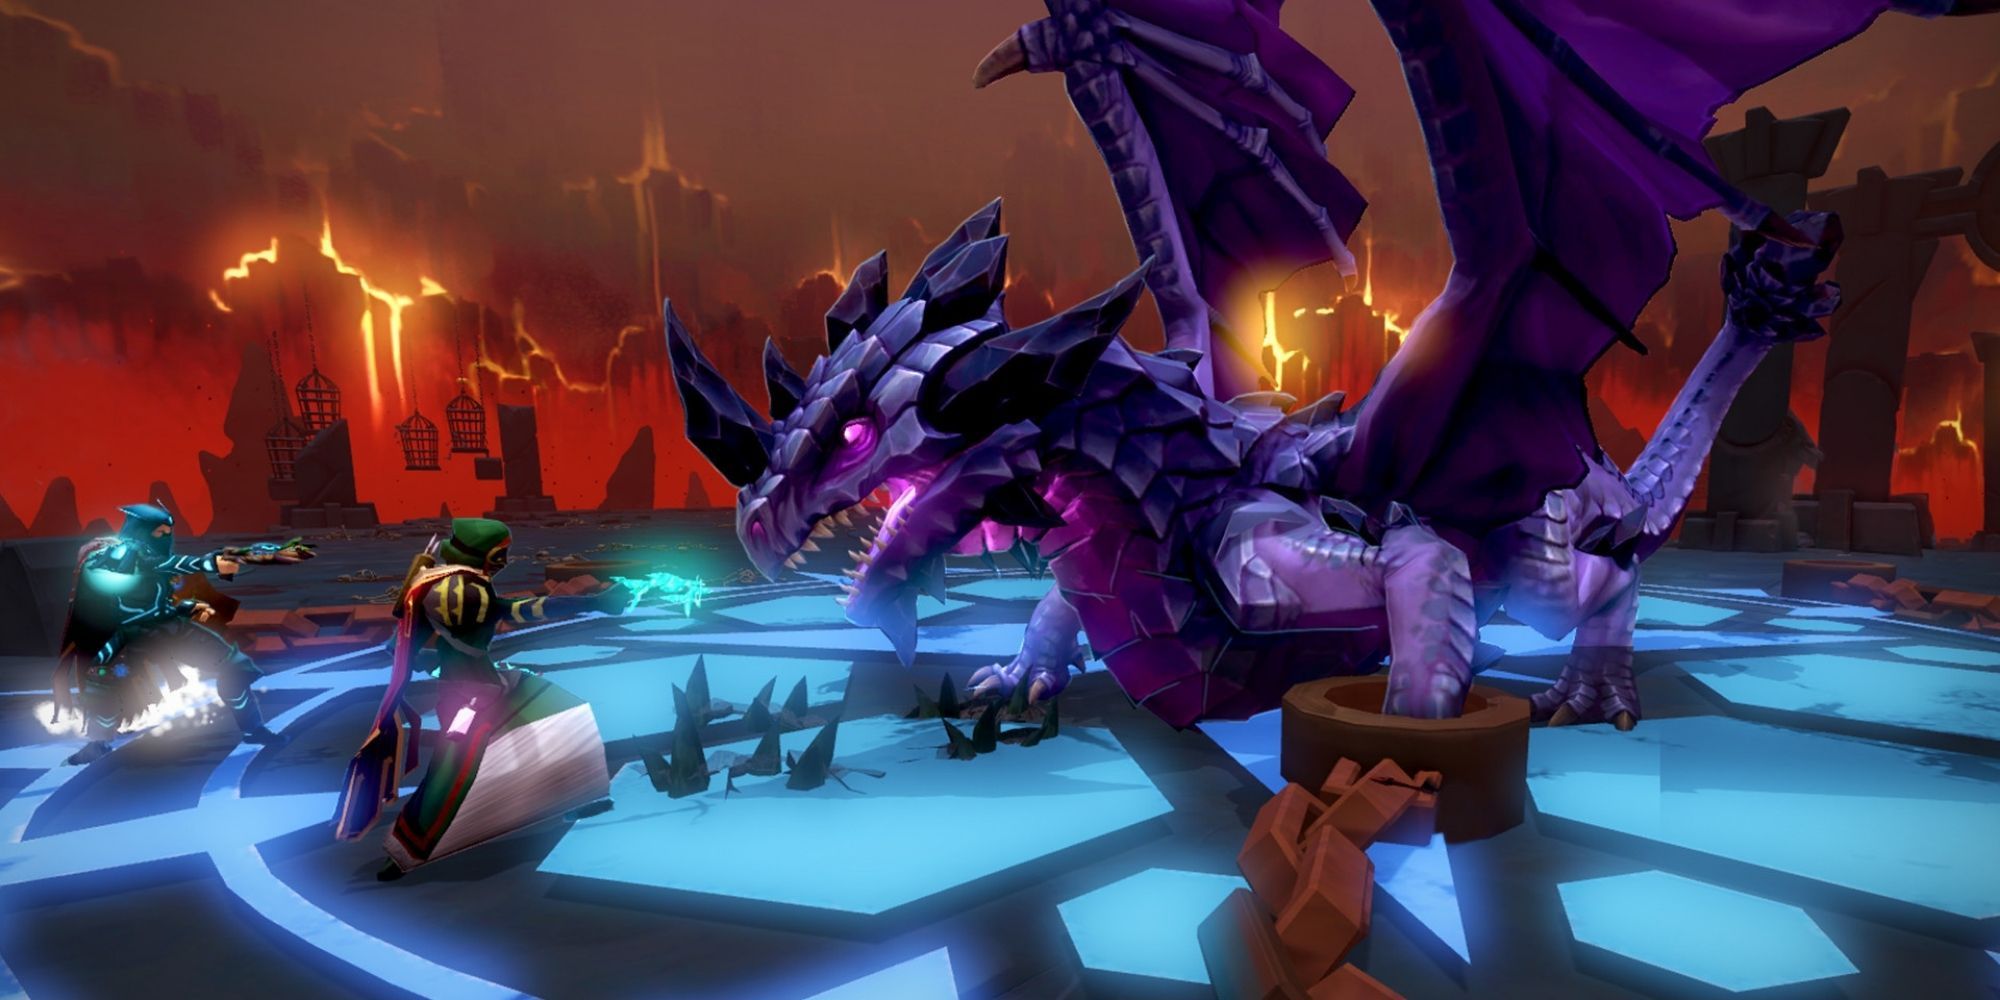 Official RuneScape 3 image of two player-characters attacking a purple dragon.